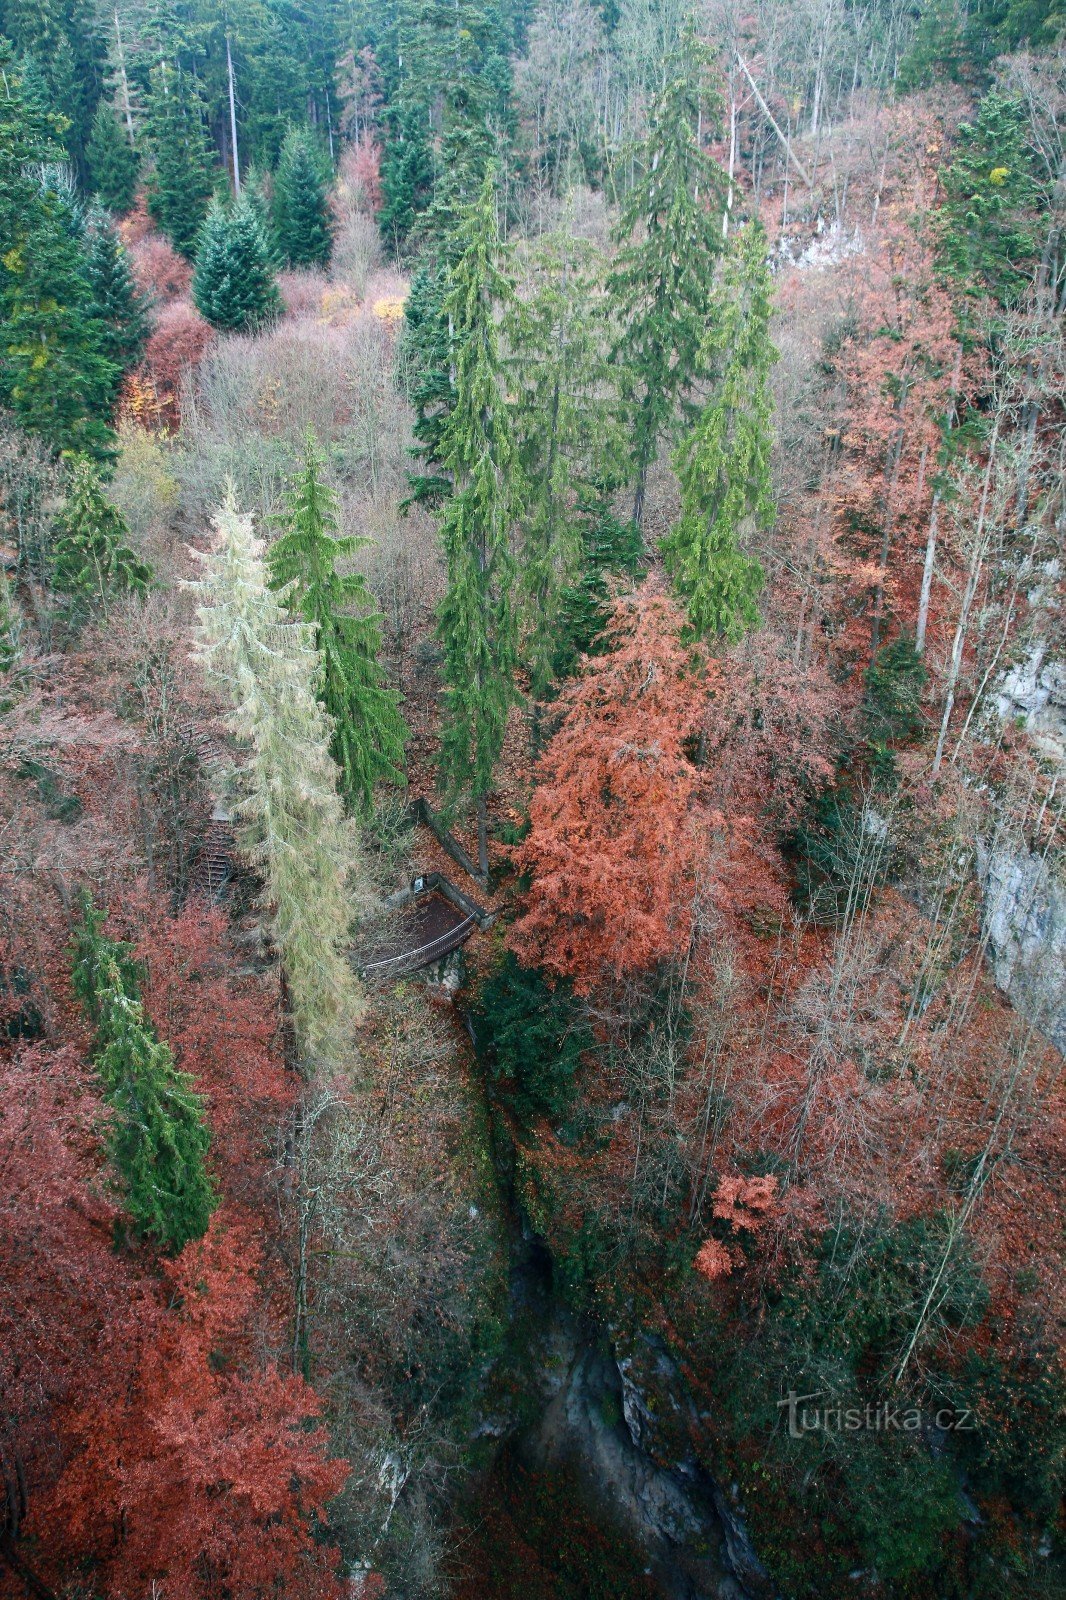 Macocha chasm - view from the upper observation deck autumn 2016